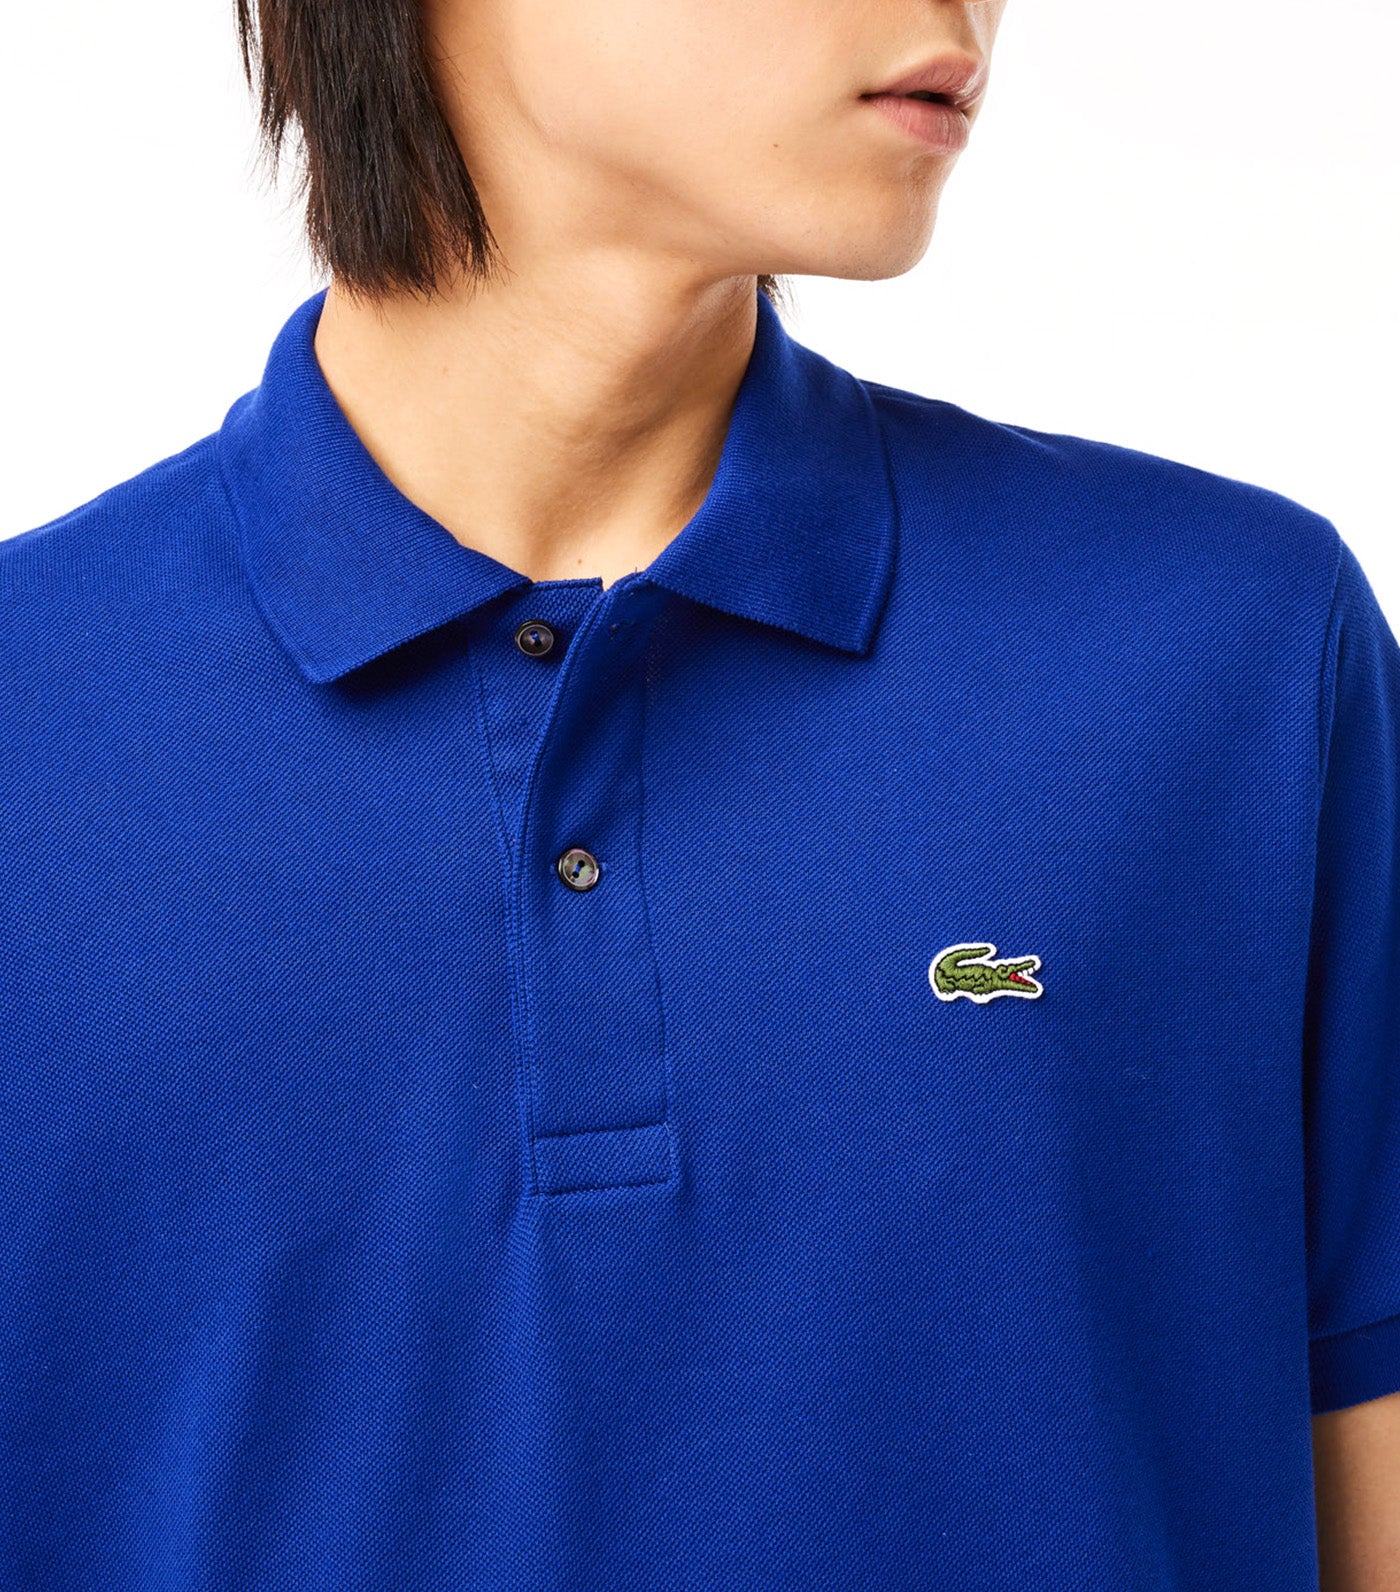 Lacoste Classic Fit L.12.12 Polo Shirt Cosmic